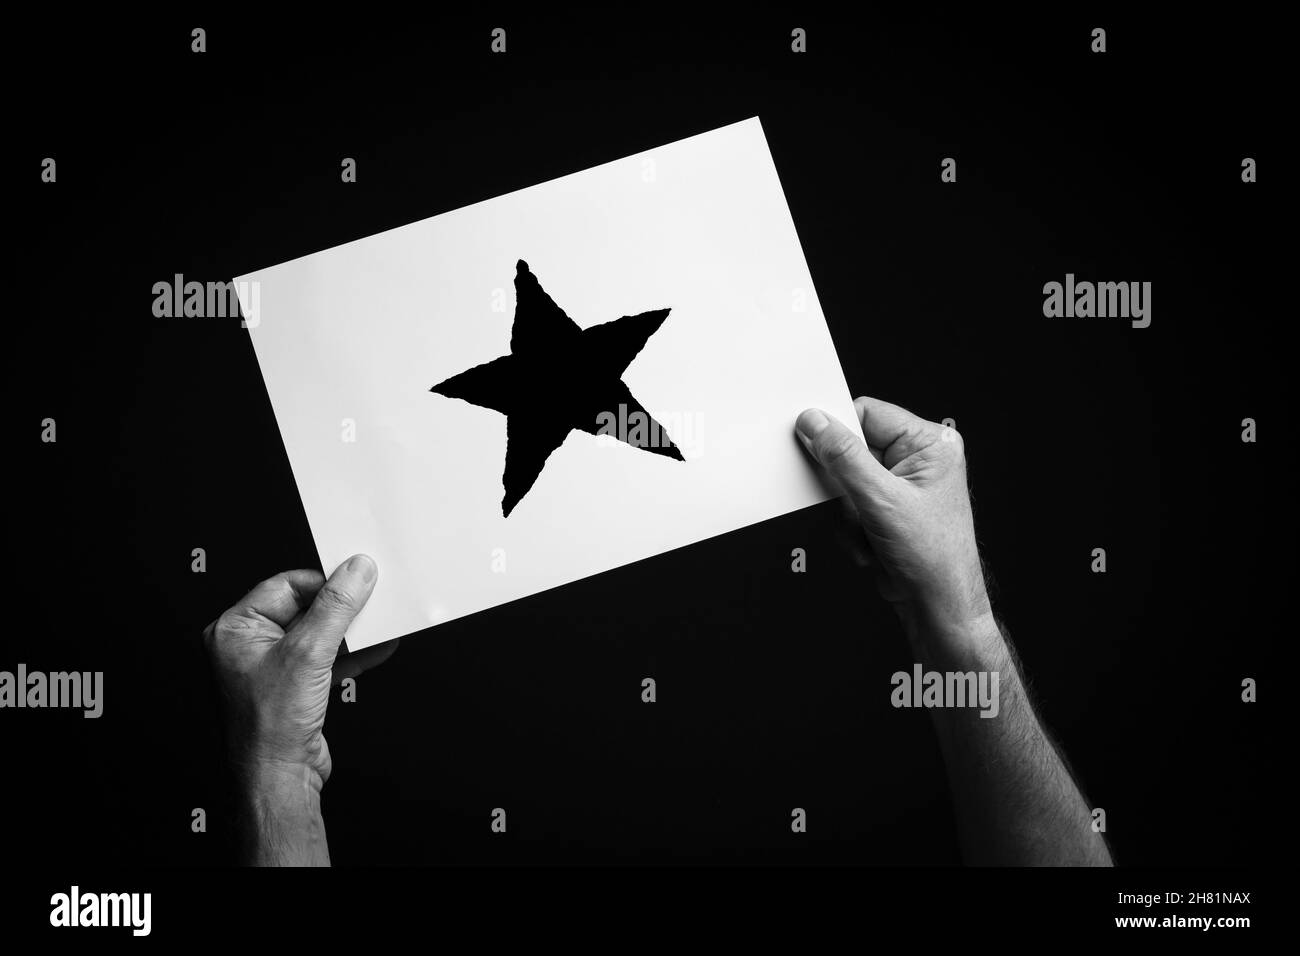 B+W image of male hands holding sheet of paper with christmas star symbol against black background. Stock Photo